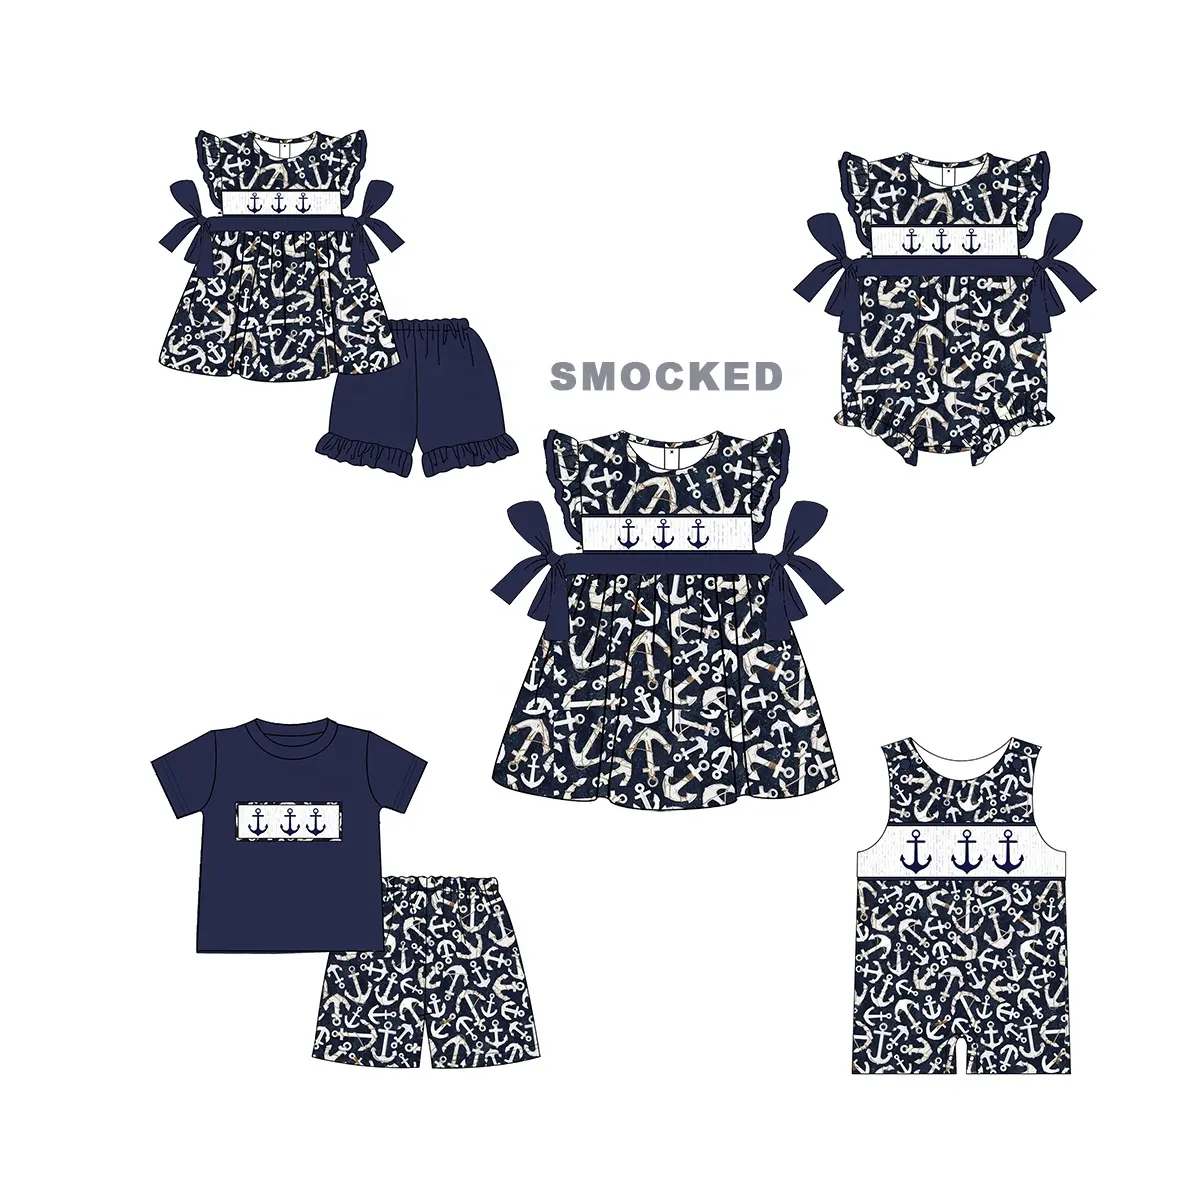 Puresun custom smocked children clothing high quality kids wear anchor patterns little girl clothing baby outfit set